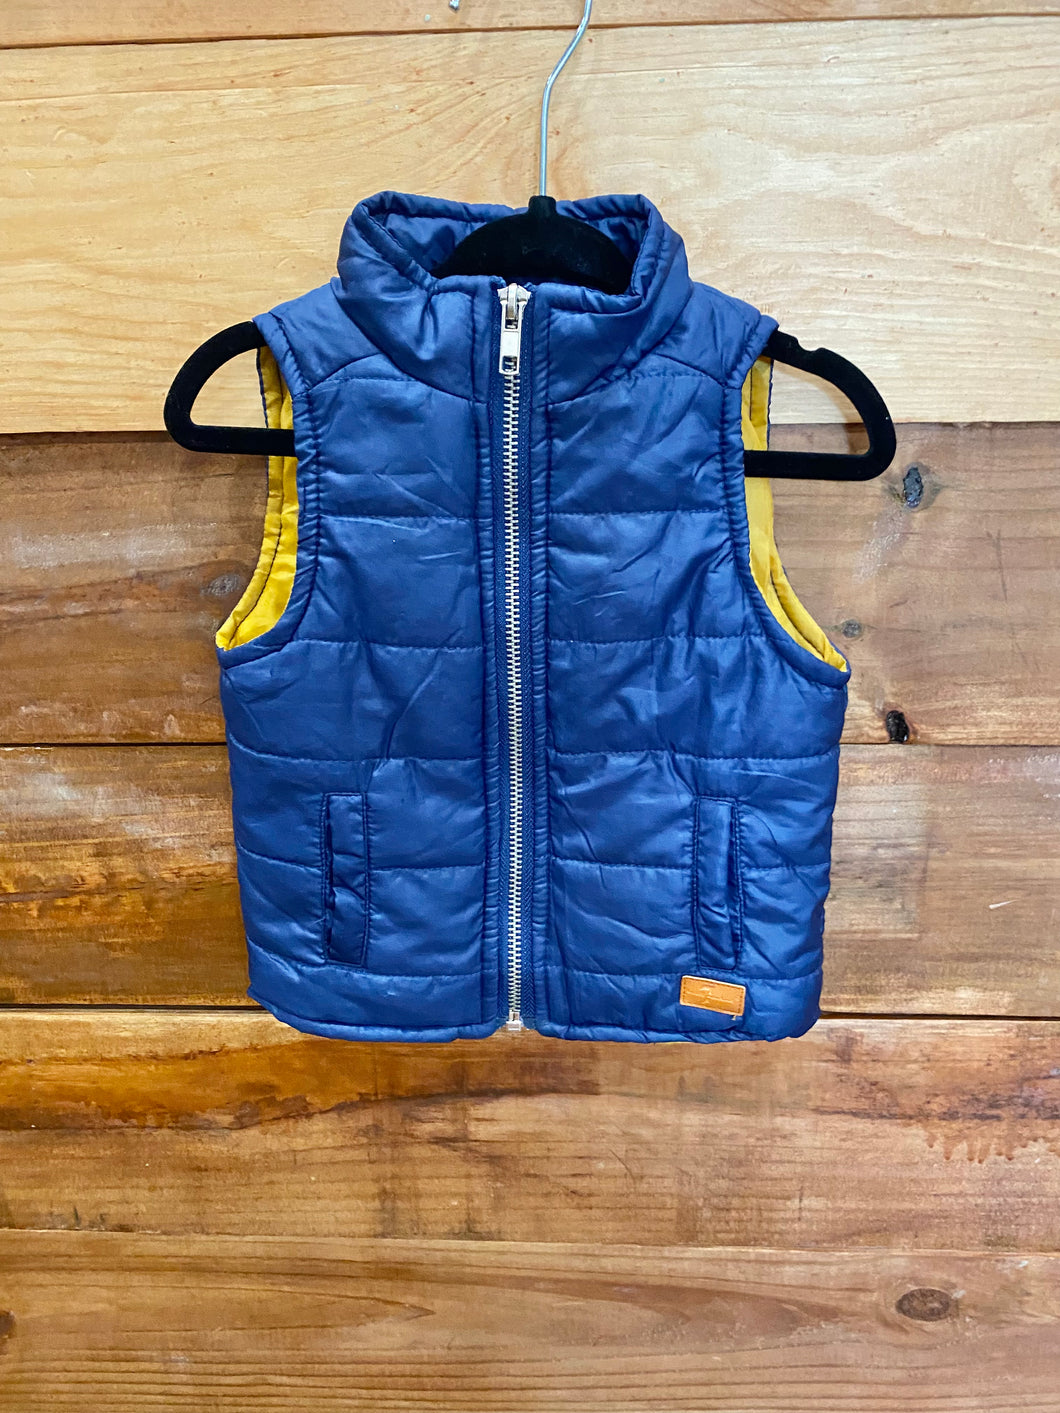 7 For All Mankind Blue Vest Size 12m